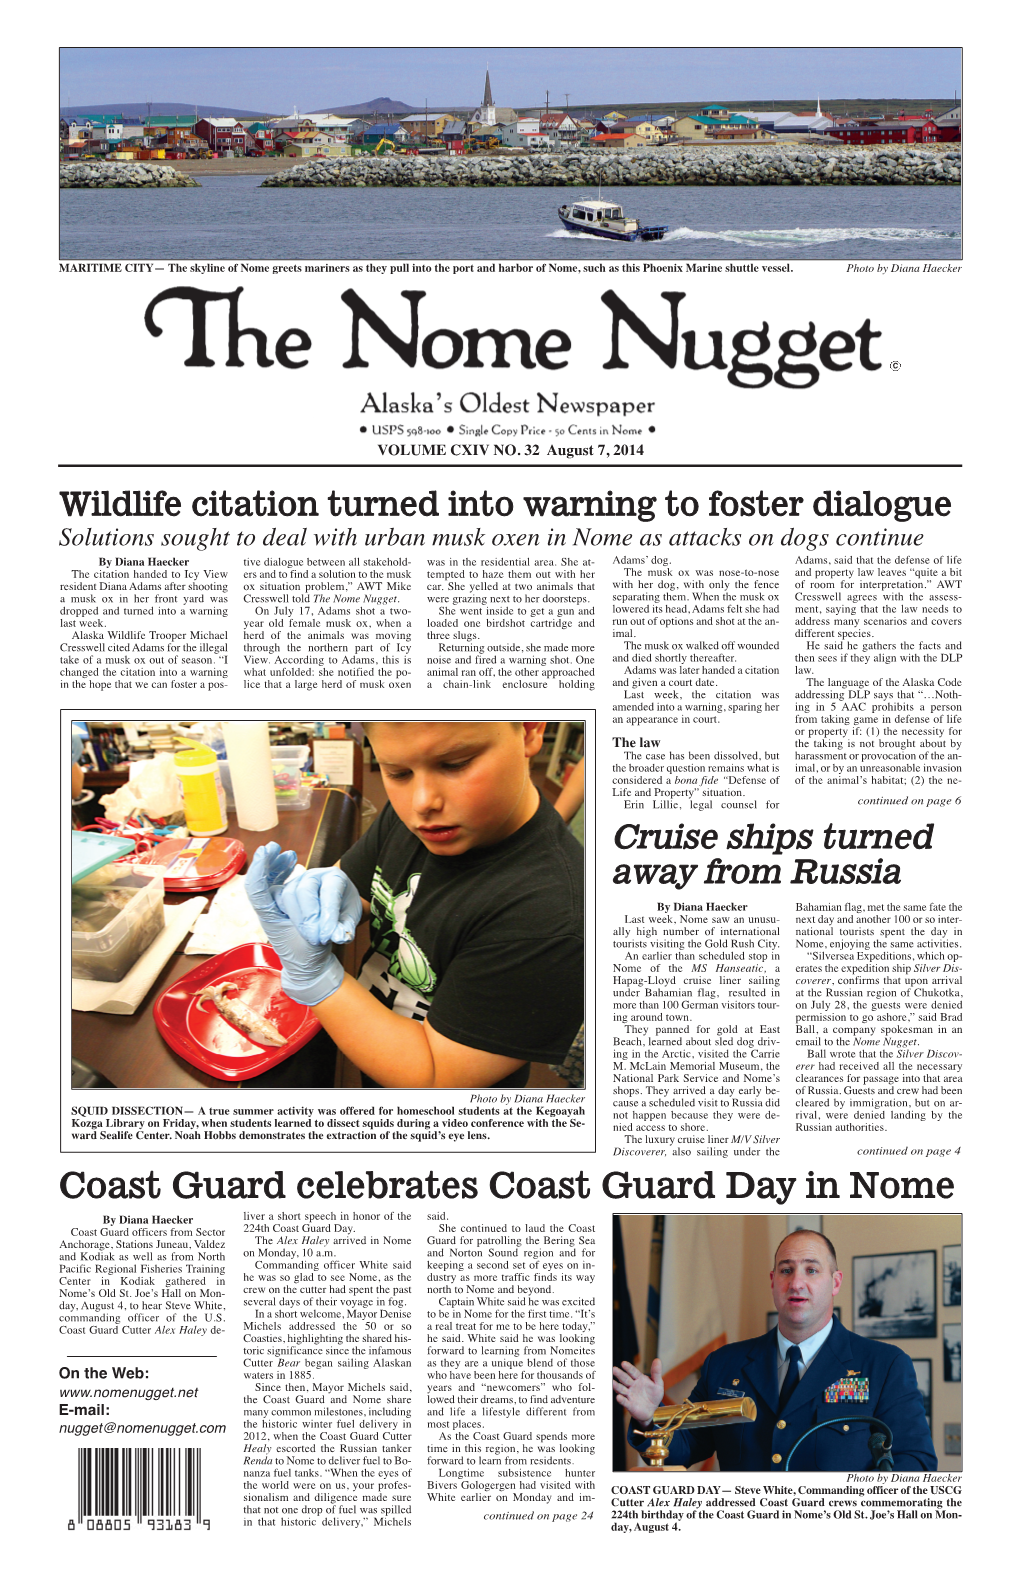 NN 8-7-14 24 Pages Diana Layout 1